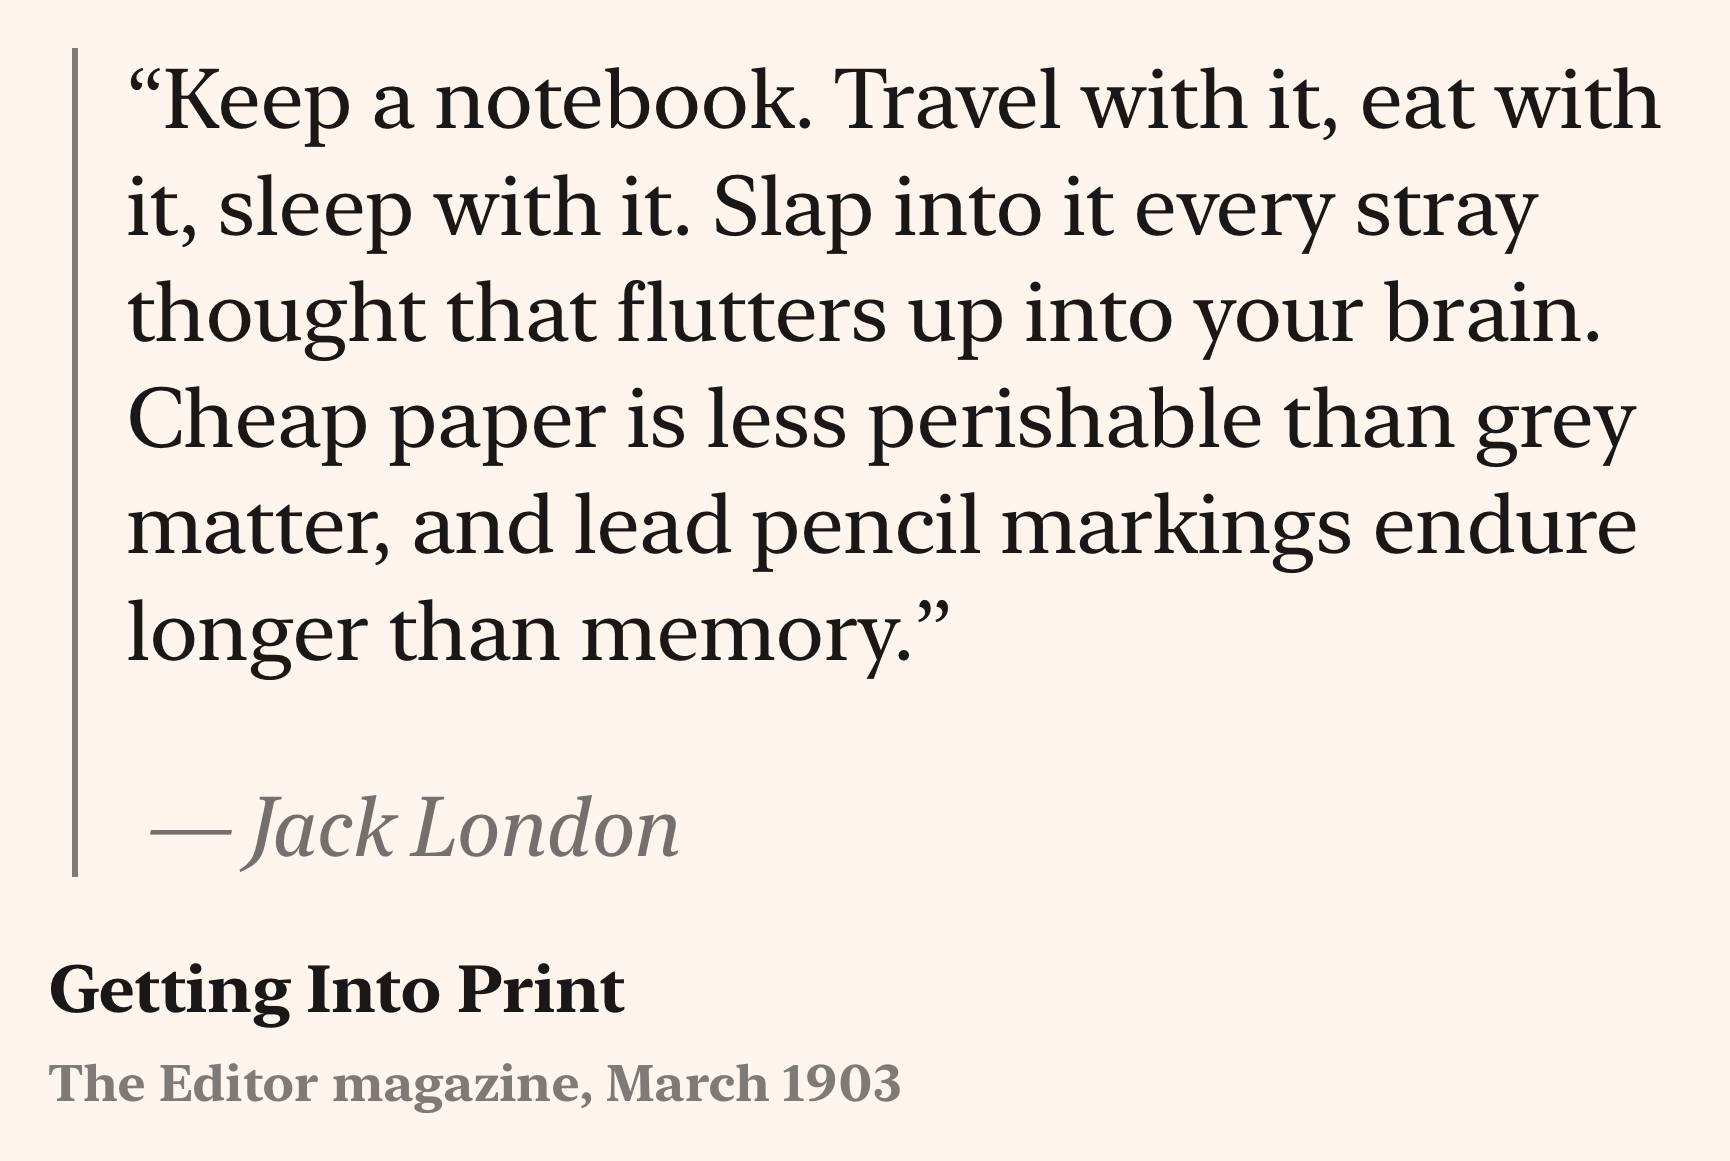 The image displays a quotation by Jack London from The Editor magazine, March 1903. The quote reads: “Keep a notebook. Travel with it, eat with it, sleep with it. Slap into it every stray thought that flutters up